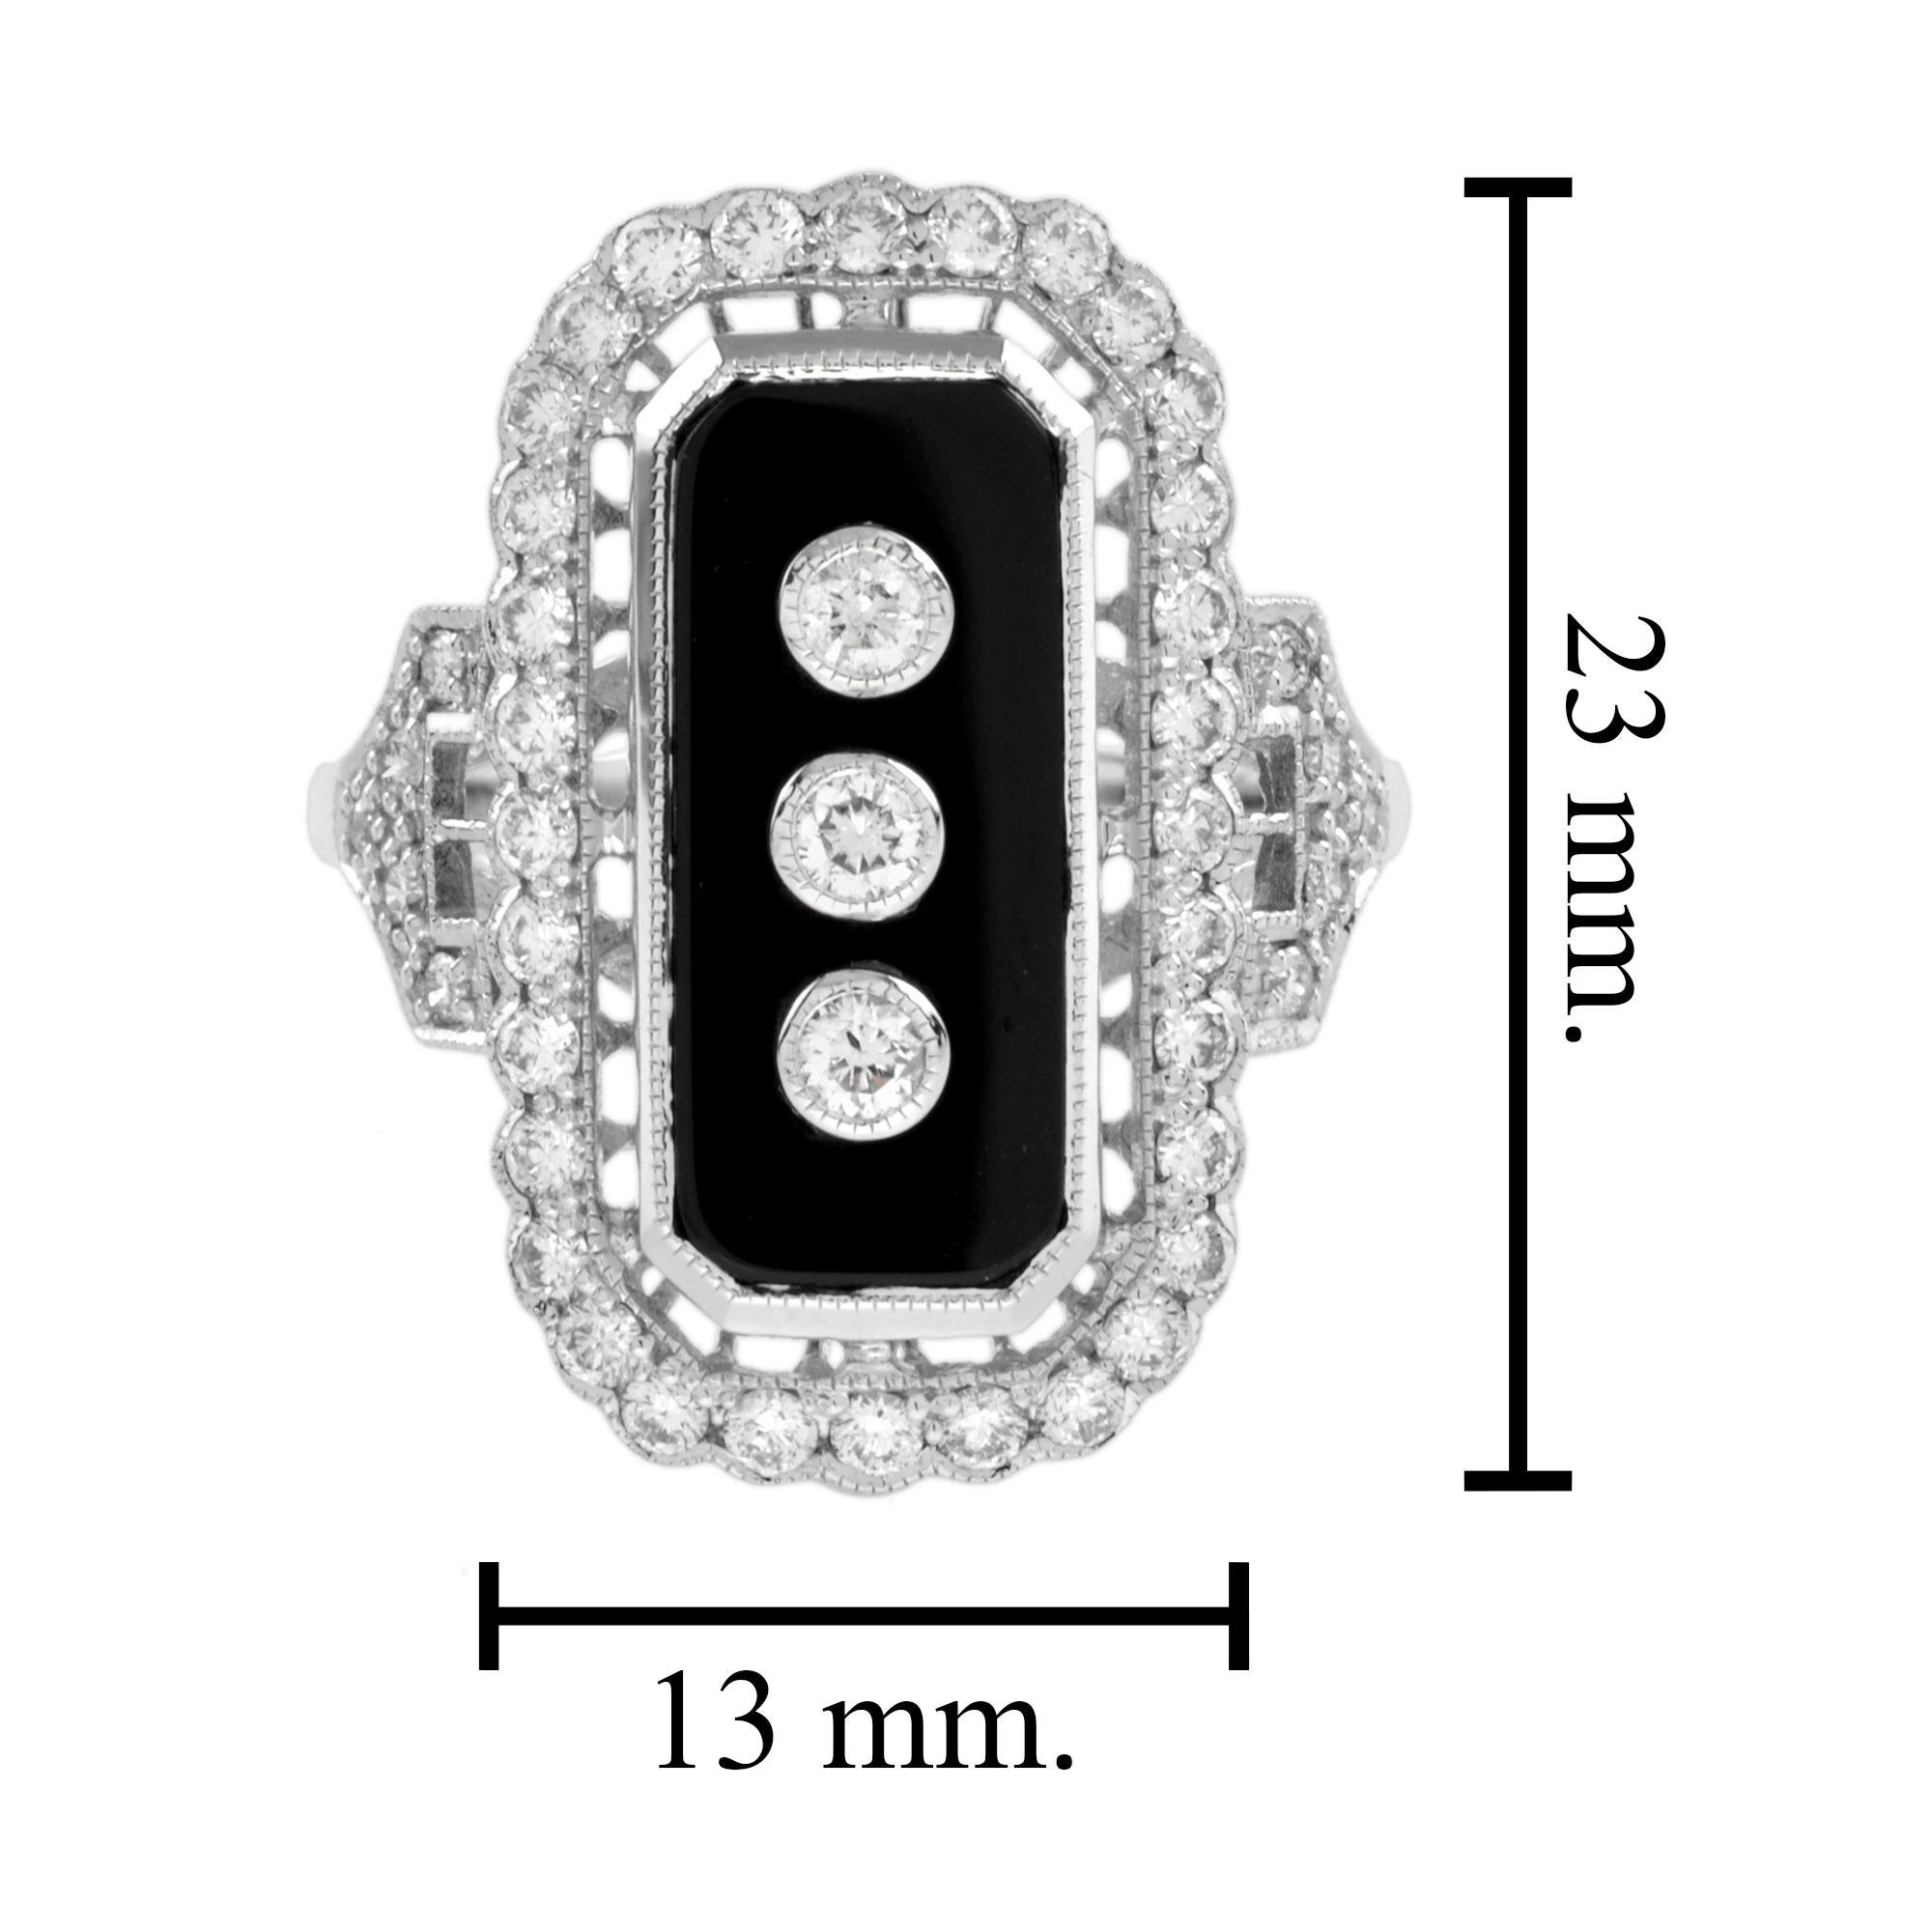 For Sale:  Art Deco Style Diamond and Onyx Ring in 18K White Gold 8